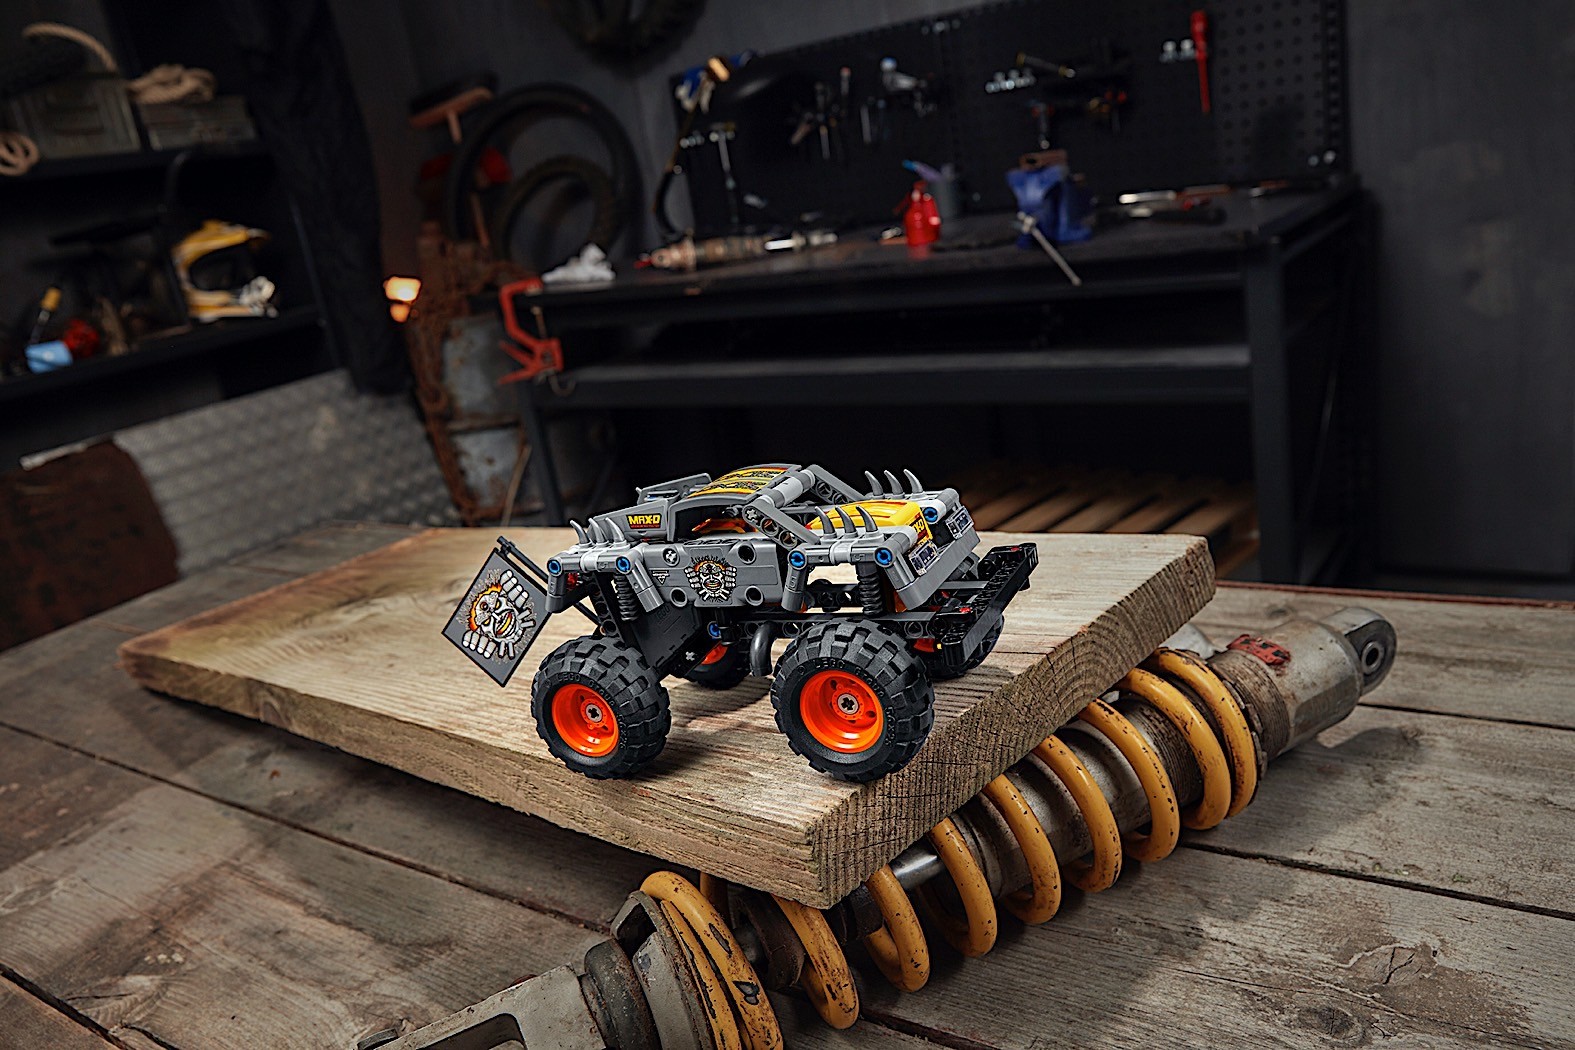 LEGO Technic Monster Jam: Grave Digger and Max-D debut - 9to5Toys